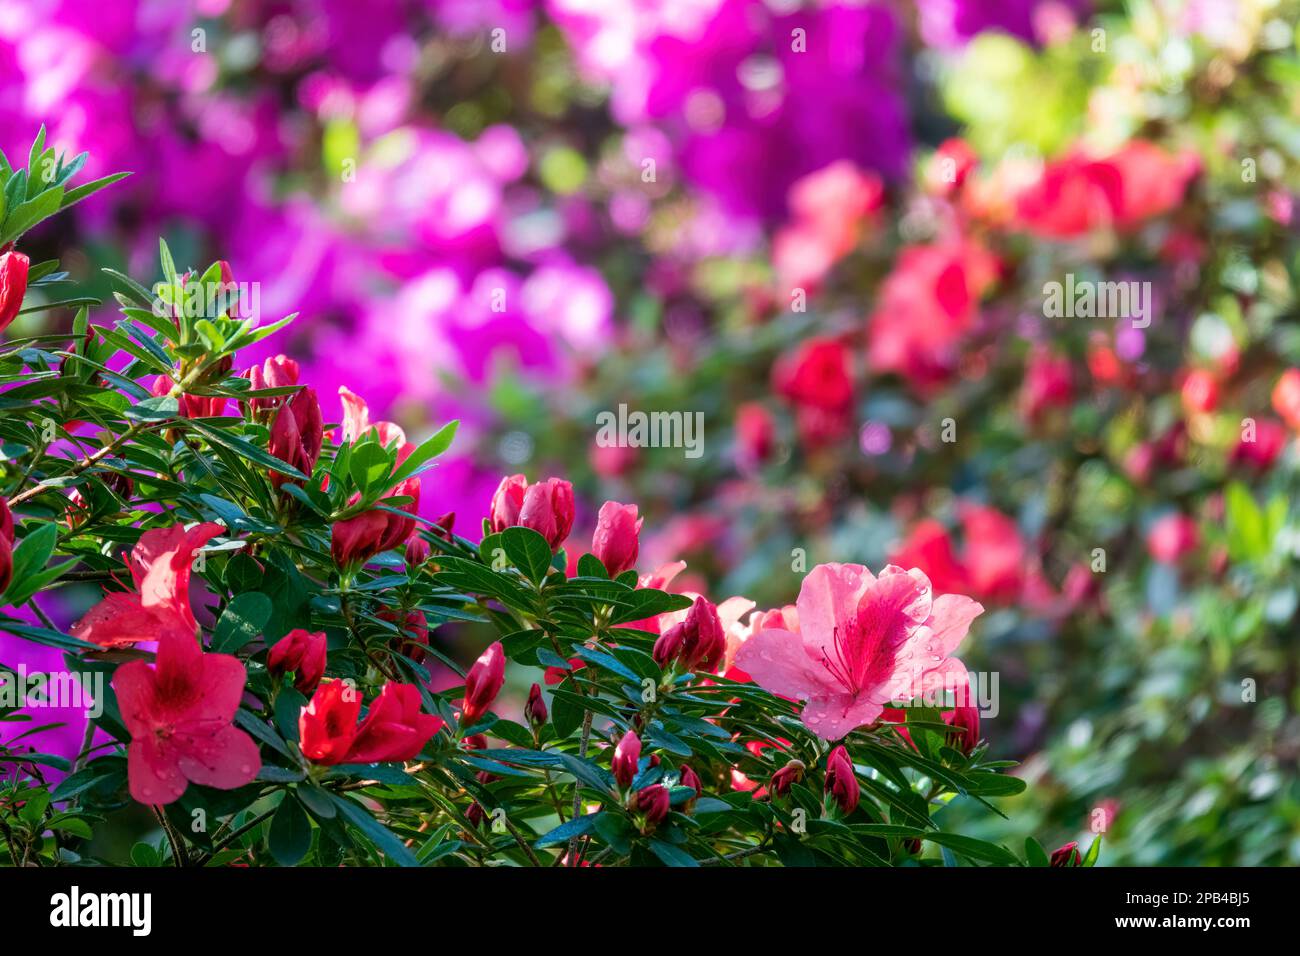 Vibrant flower background. Blooming rhododendron flowers with selective focus on the foreground. Stock Photo